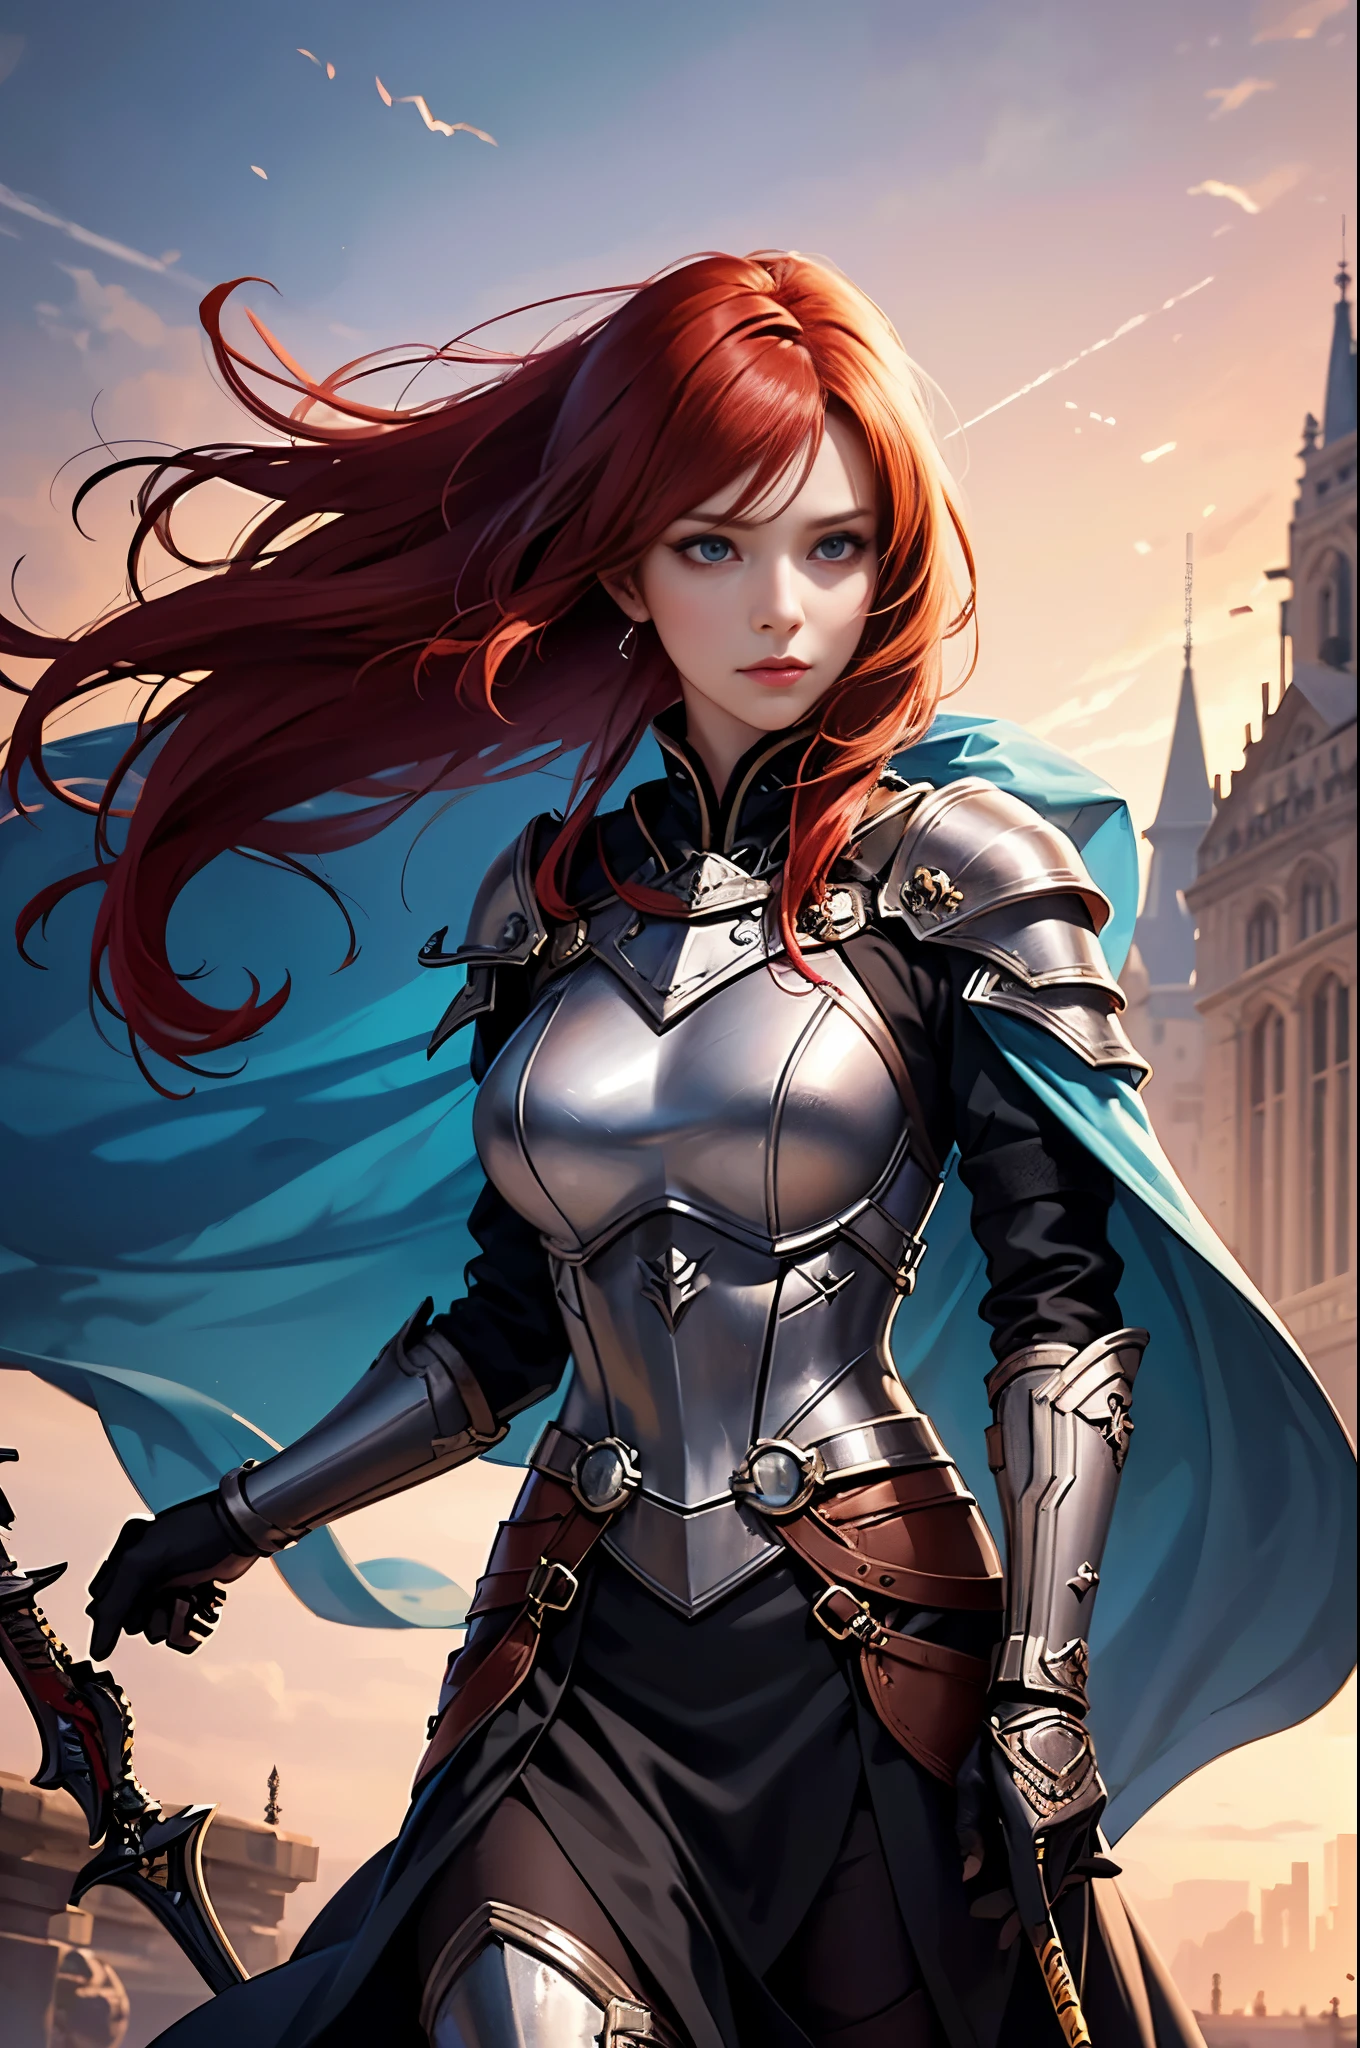 Red-haired arafed woman in black and red costume with sword, a character portrait by Yang J, cg society contest winner, Fantasy Art, redhead queen in heavy red armor, epic exquisite character art, Stunning character art, 2. 5 d cgi anime Fantasy Artwork, alice x. zhang, Gorgeous Female Paladin, epic fantasy digital art style, beautiful female knight, eventide, Battlefield Commander,A woman in her 30s who boasts unparalleled beauty, Invincible female general, brave, Awe-inspiring Hall々, Perfect good looks, Very detailed and beautiful blue eyes, perfect supermodel body, Slender body, Cloak wrapped in the wind, Battle Master, Veteran Warrior, incarnation of athena, Best Quality, Perfect Angle, perfect-composition, Best Shots, Official art, ciinematic light, very beautiful and fantastic scenery, chivalry dream, female solo